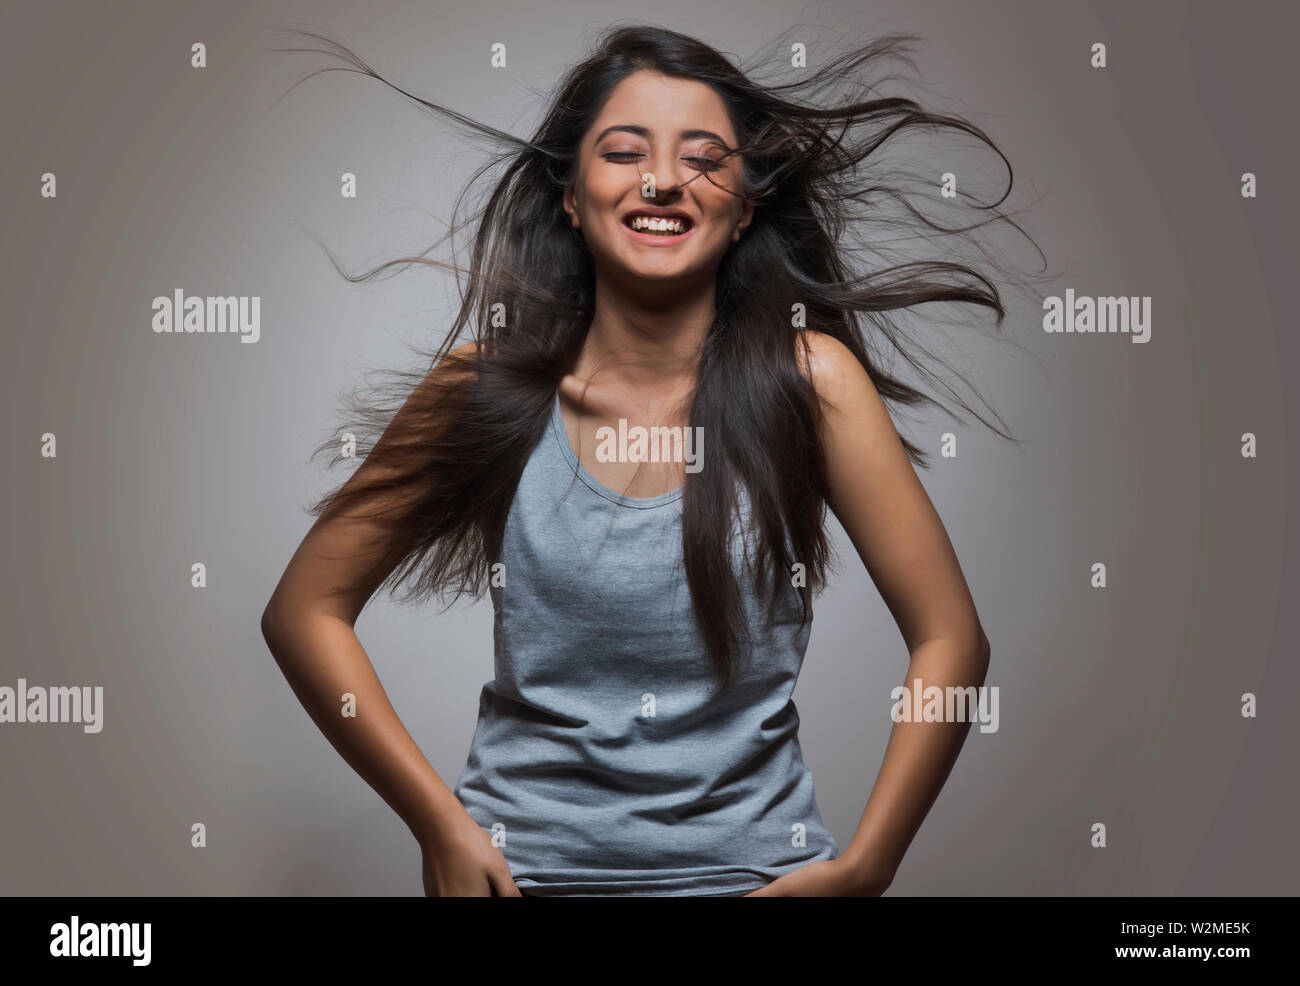 Young girl laughing with her eyes closed and hair flying around Stock Photo